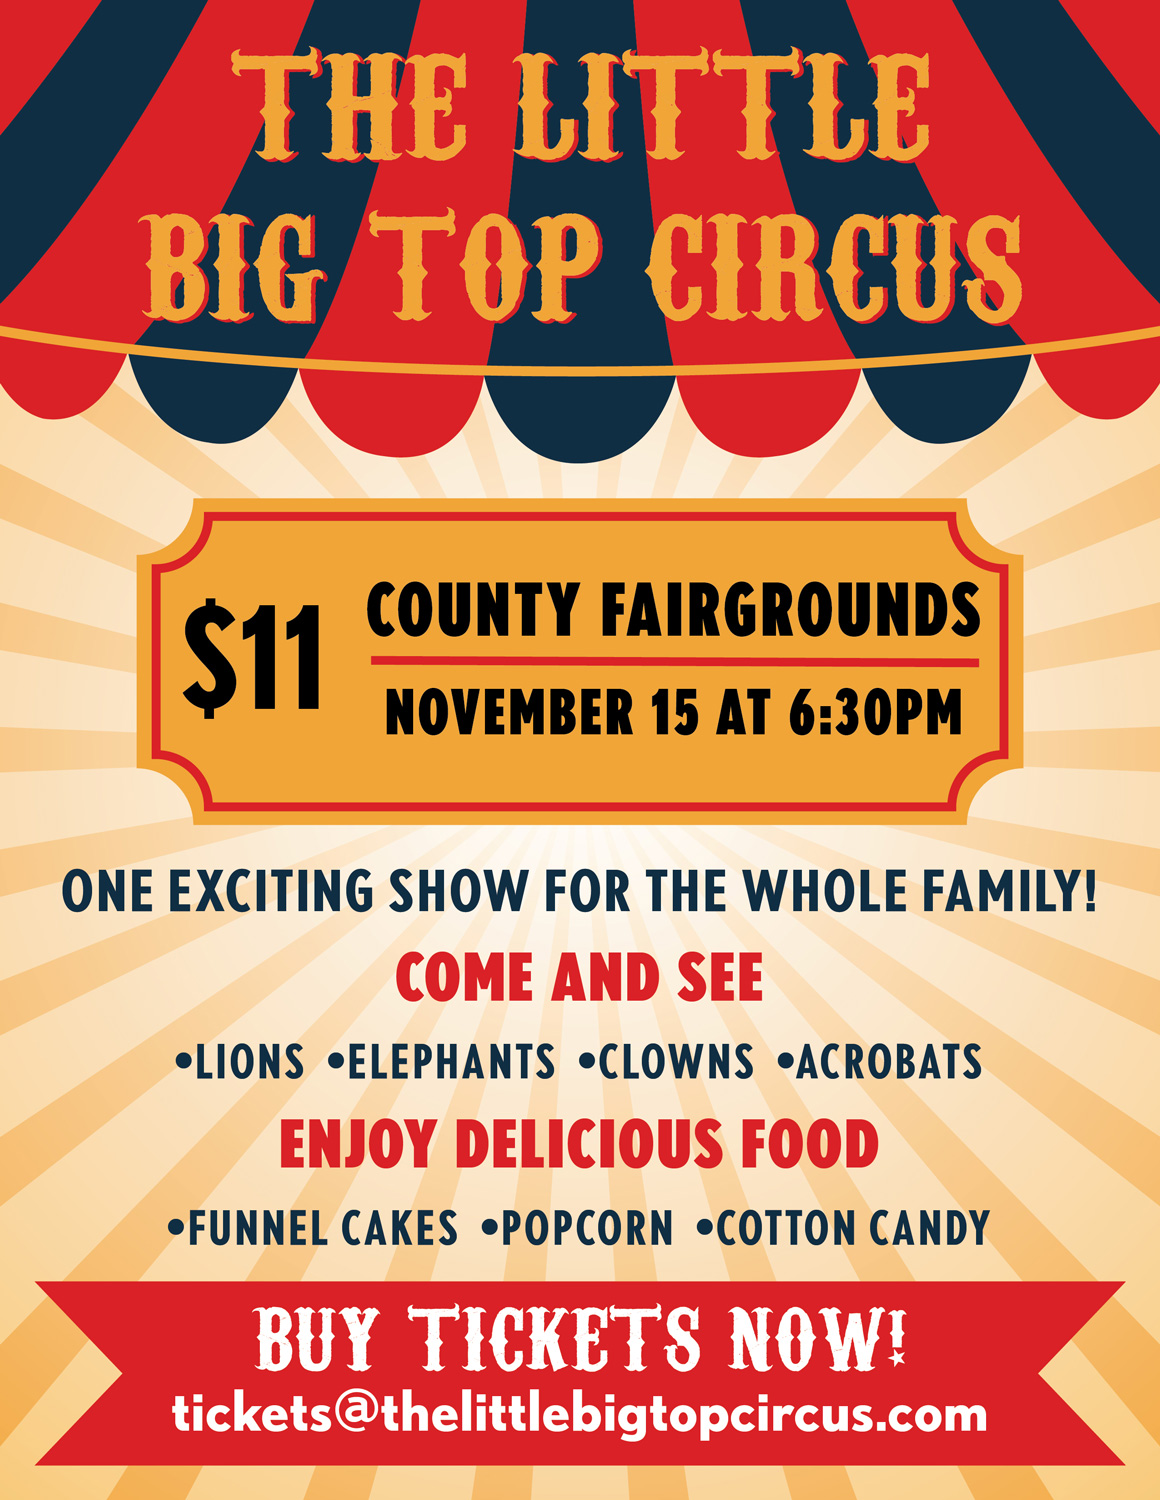 The Little Big Top Circus flyer design